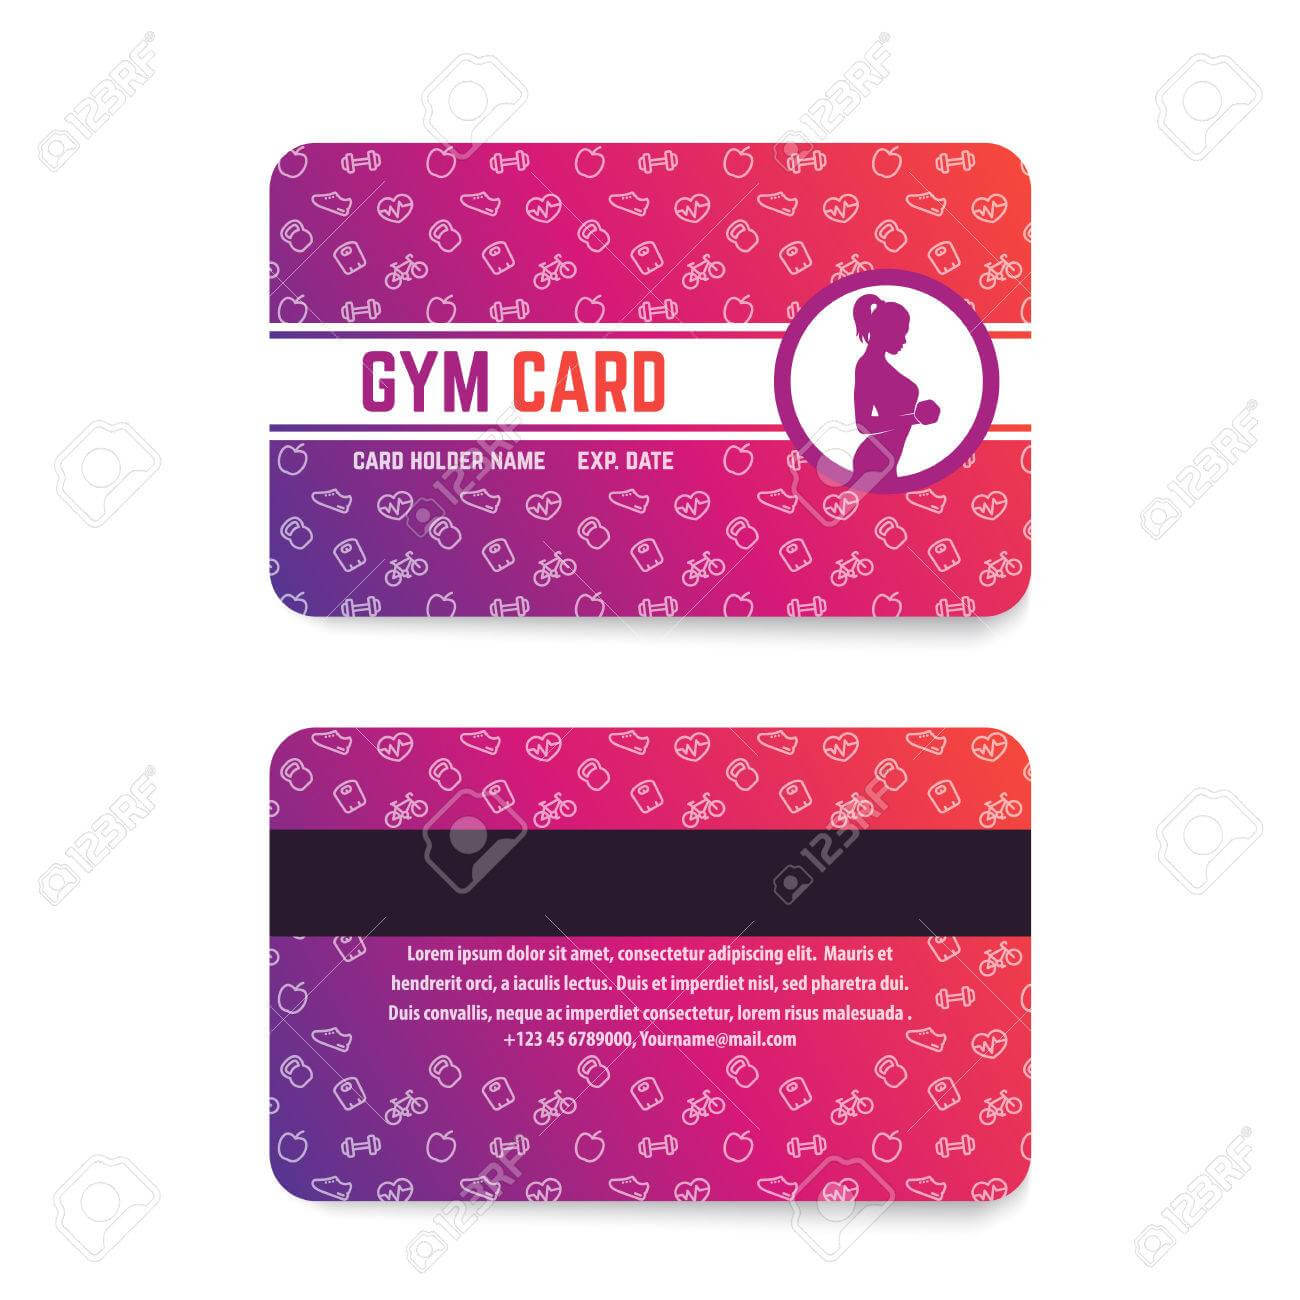 25 Cool Membership Card Templates Designs (Ms Word) ᐅ within Gym